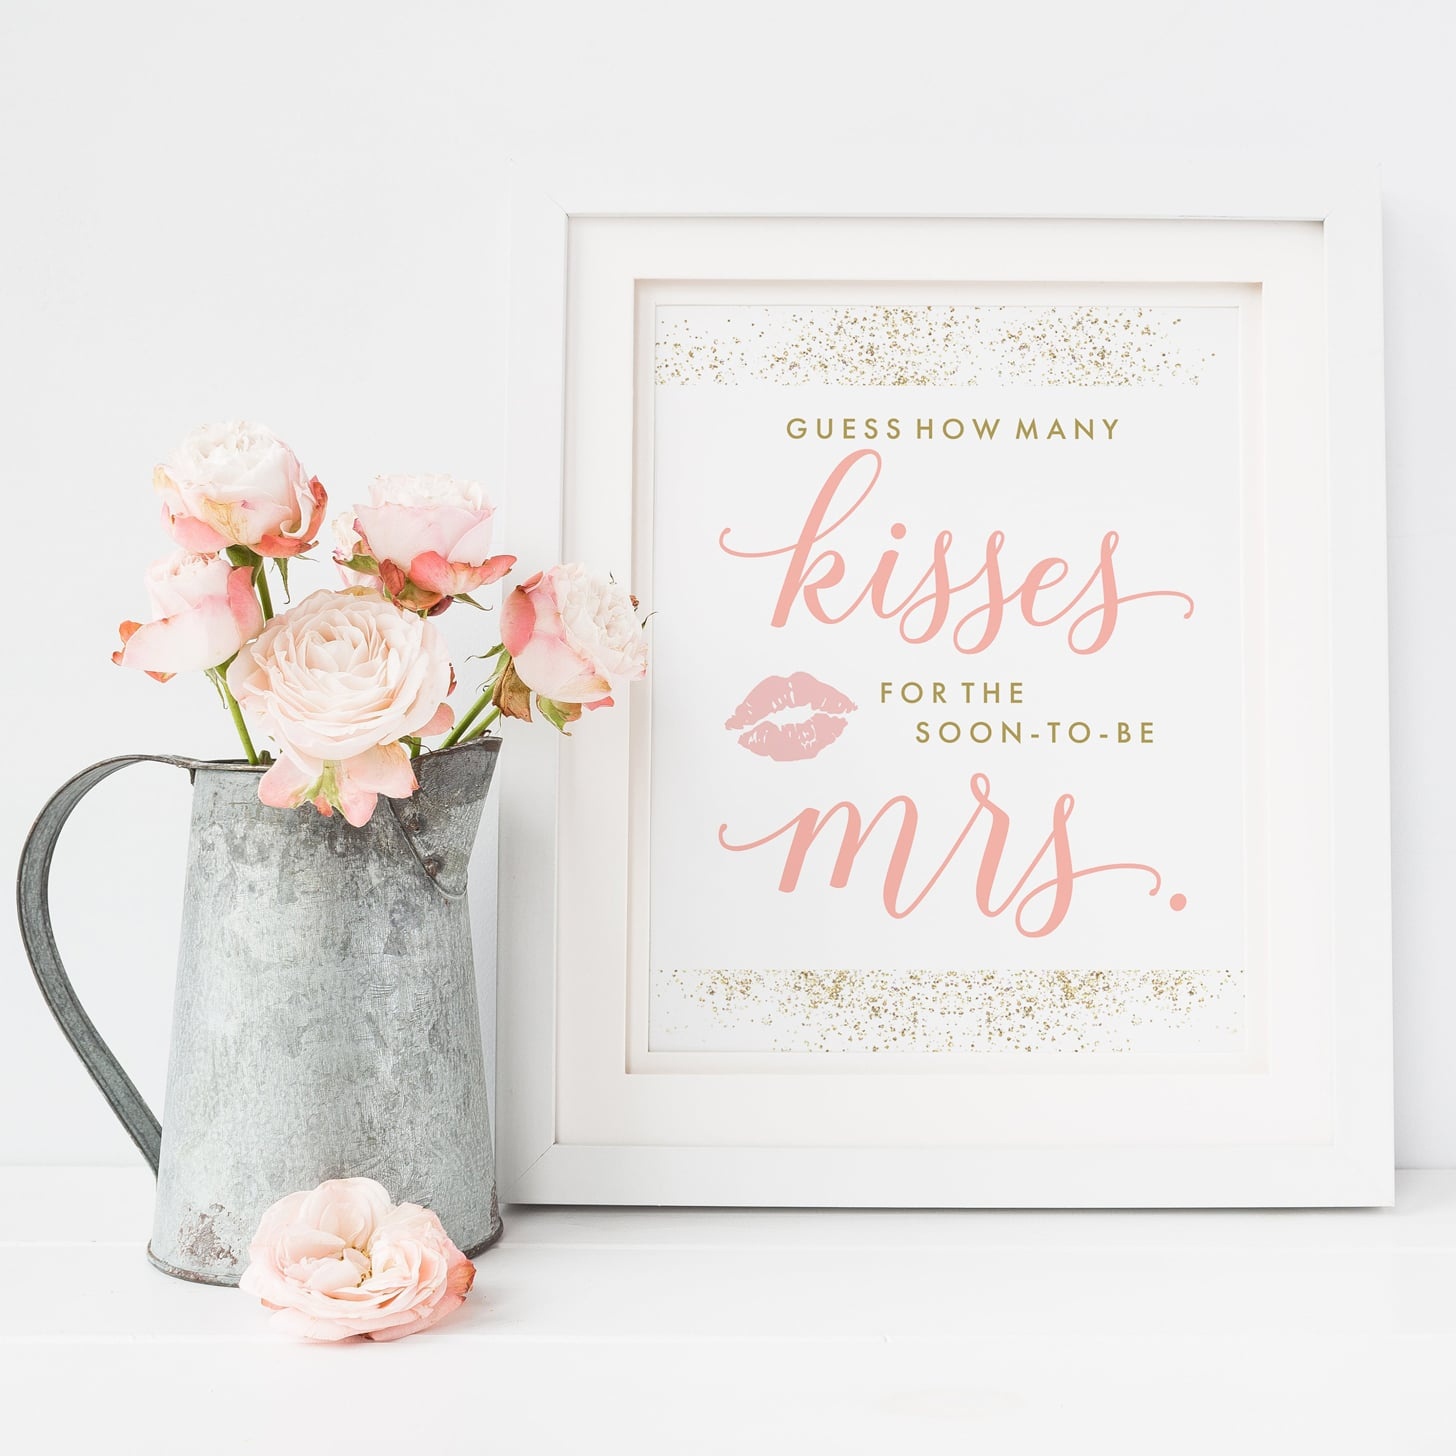 Guess How Many Kisses For The Soon-To-Be Mrs. Printable Game - How Many Kisses Game Free Printable